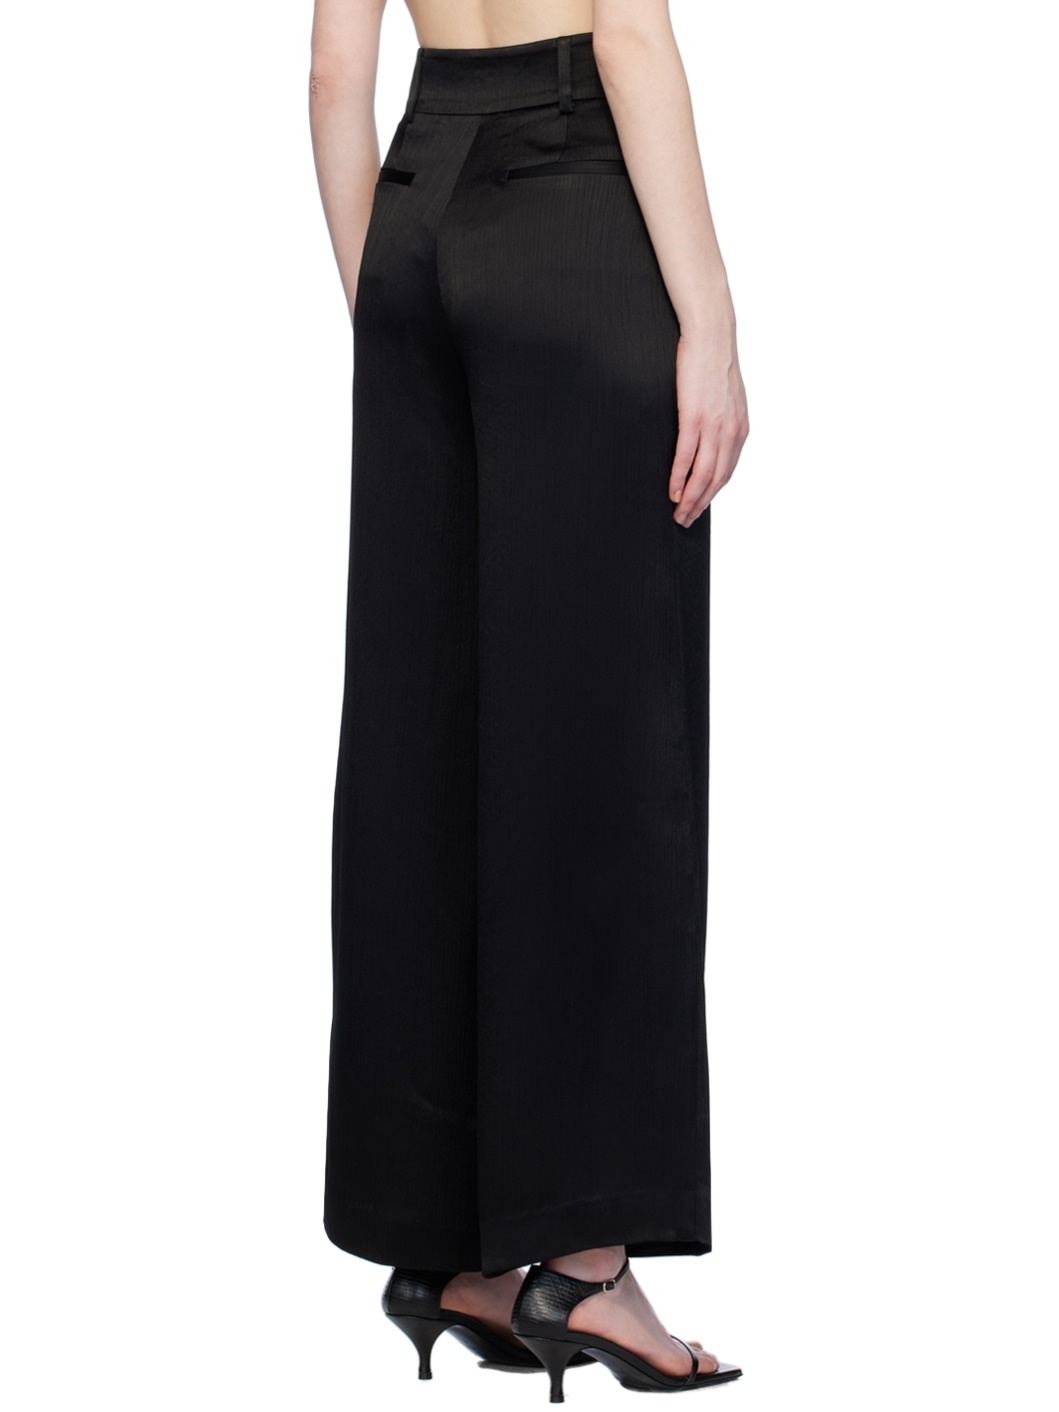 Black Textured Trousers - 3